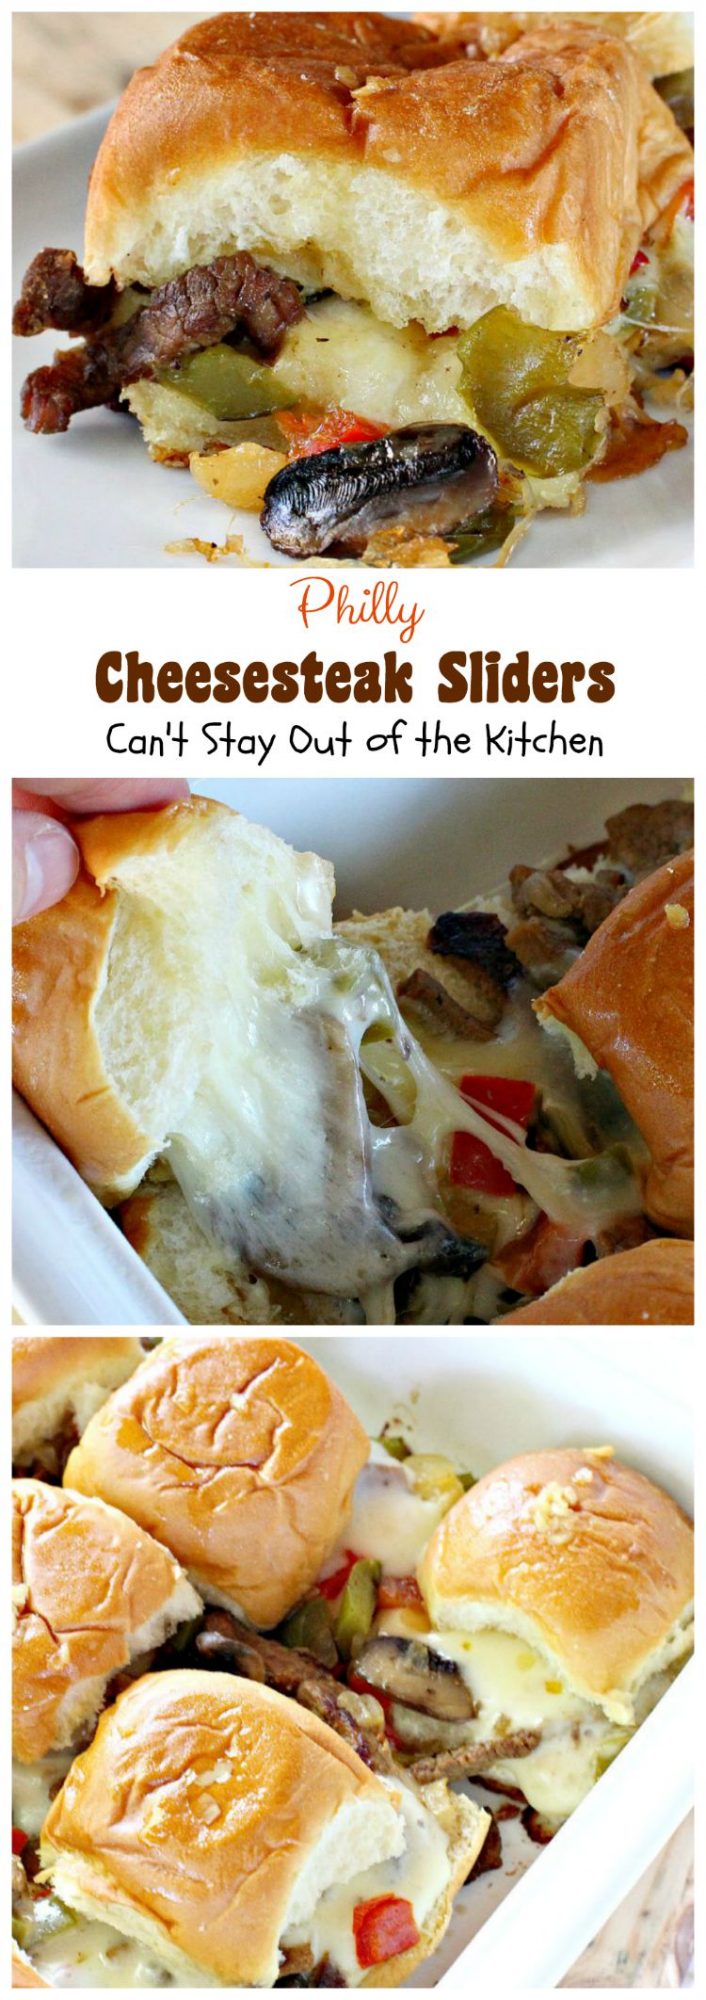 Philly Cheesesteak Sliders – Can't Stay Out of the Kitchen